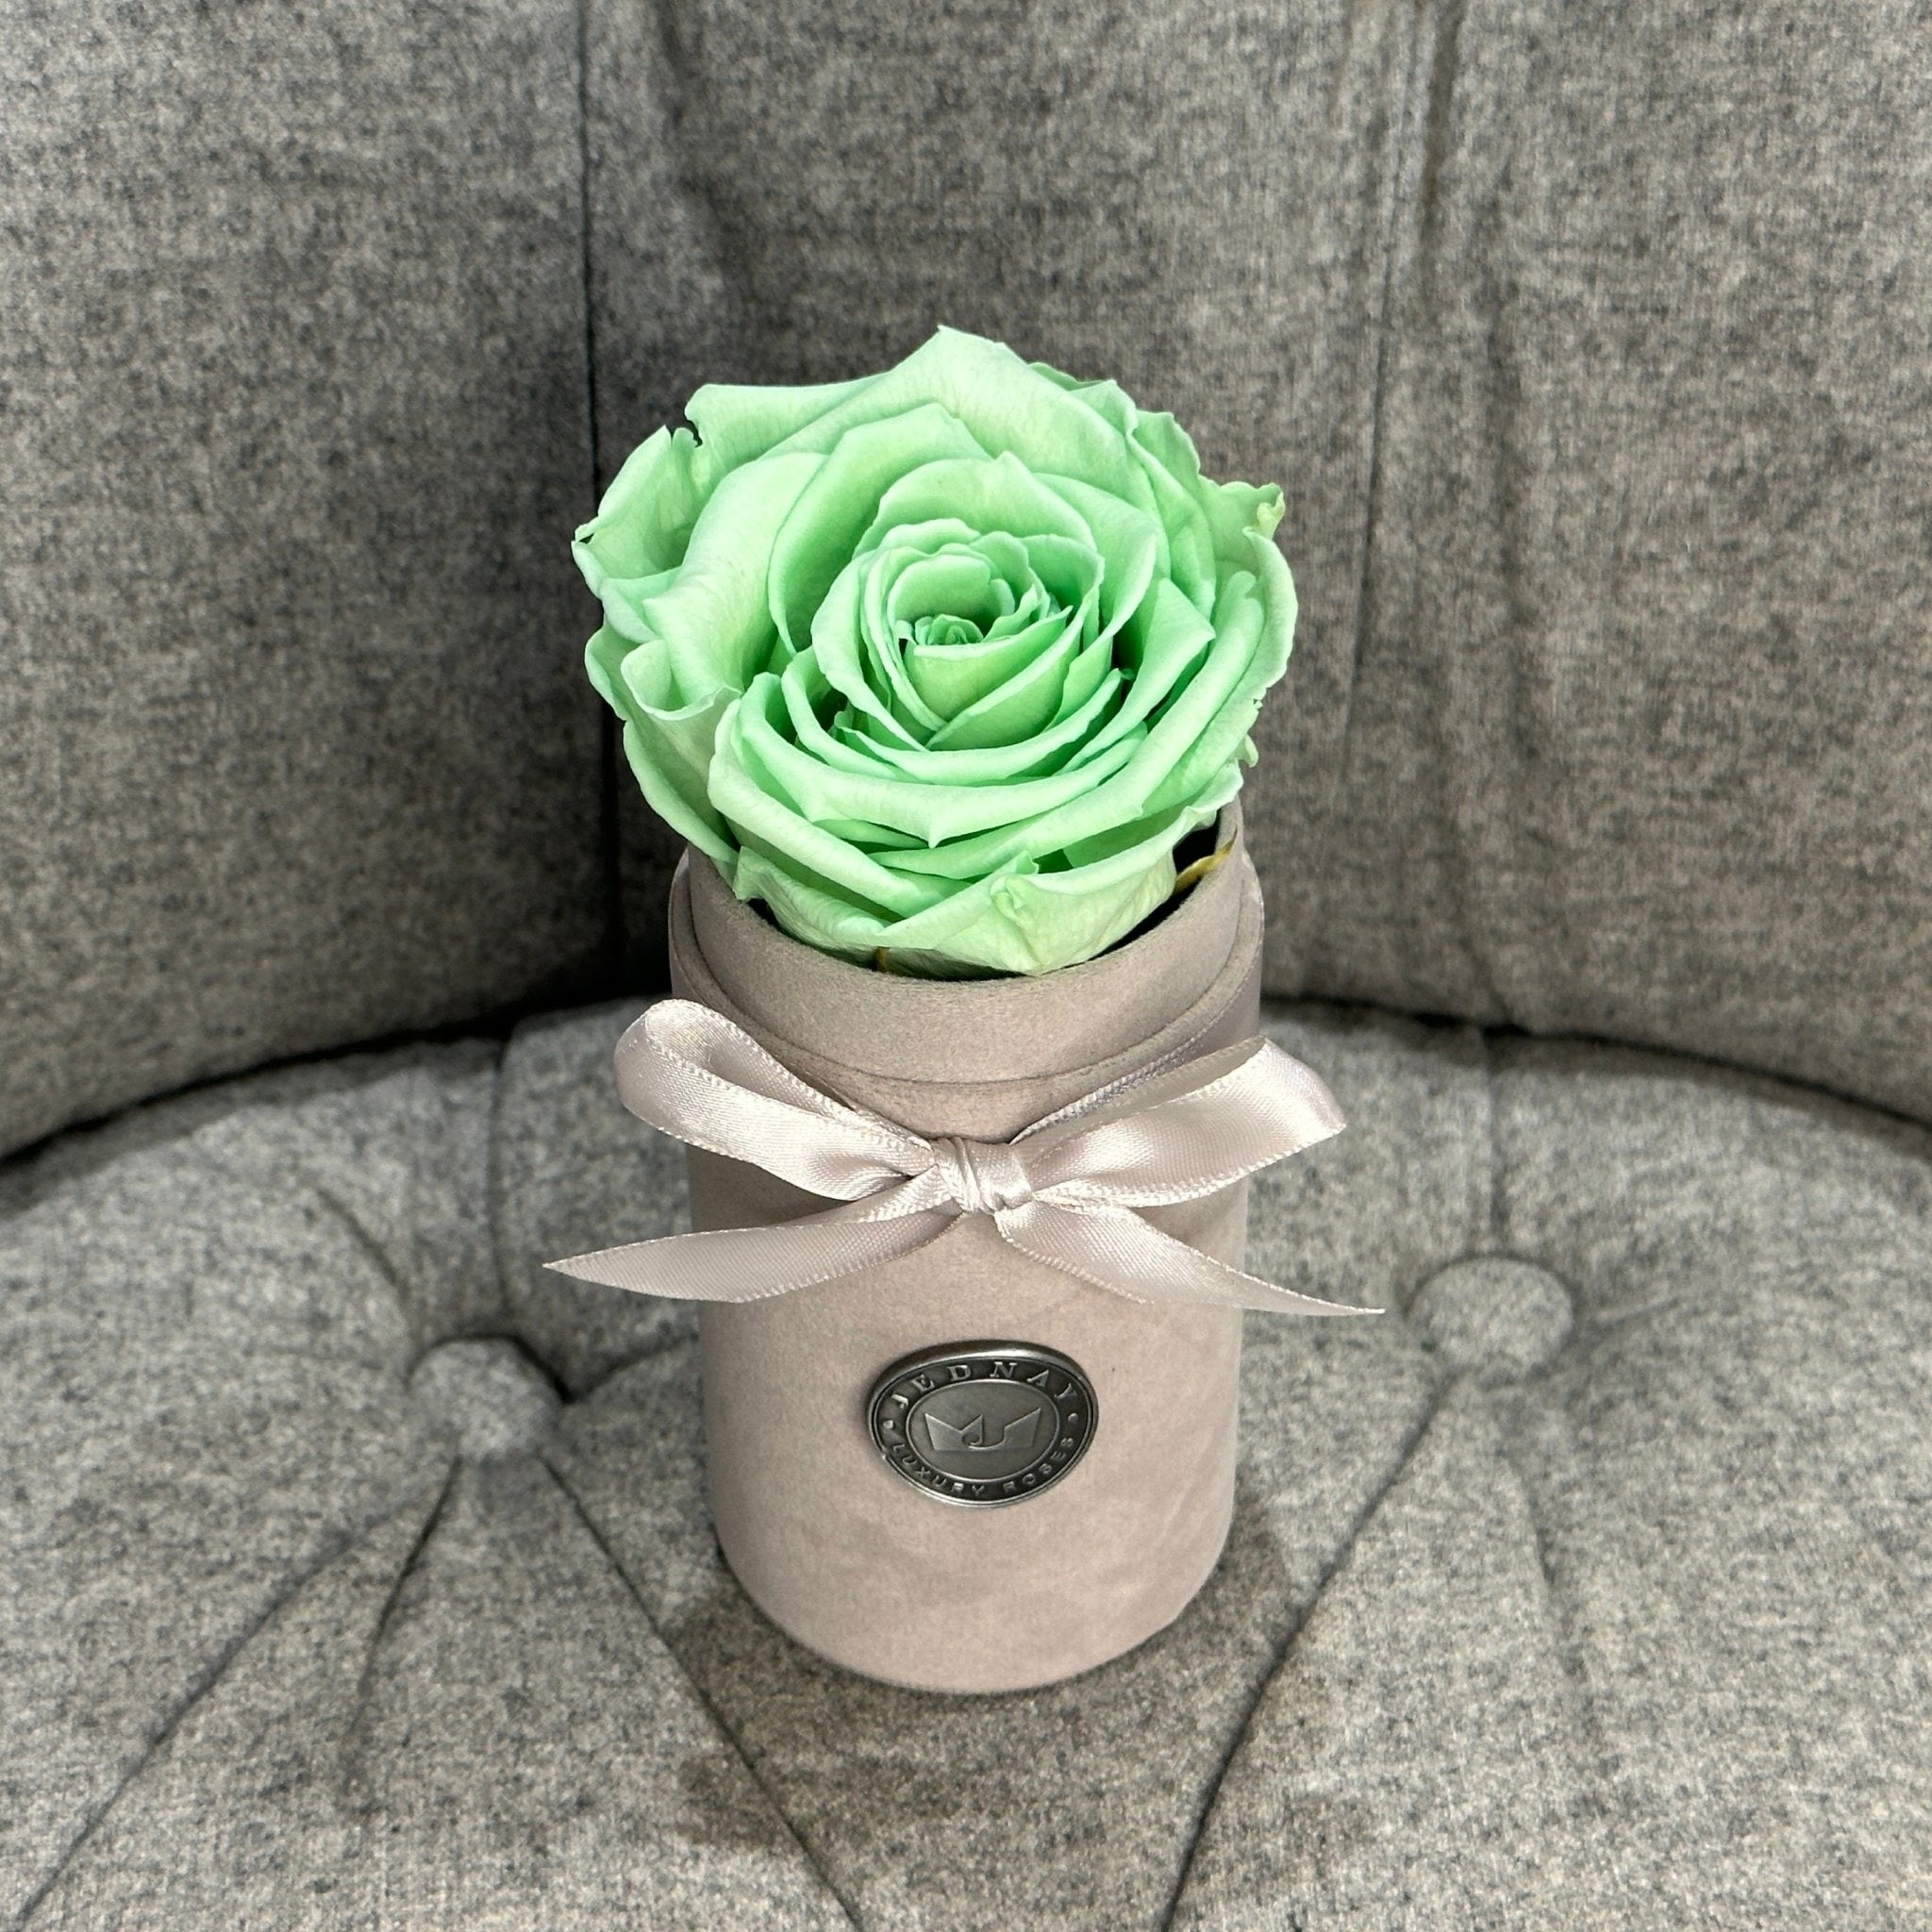 Single Grey Suede Forever Rose Box - Peppermint Tea Eternal Rose - Jednay Roses